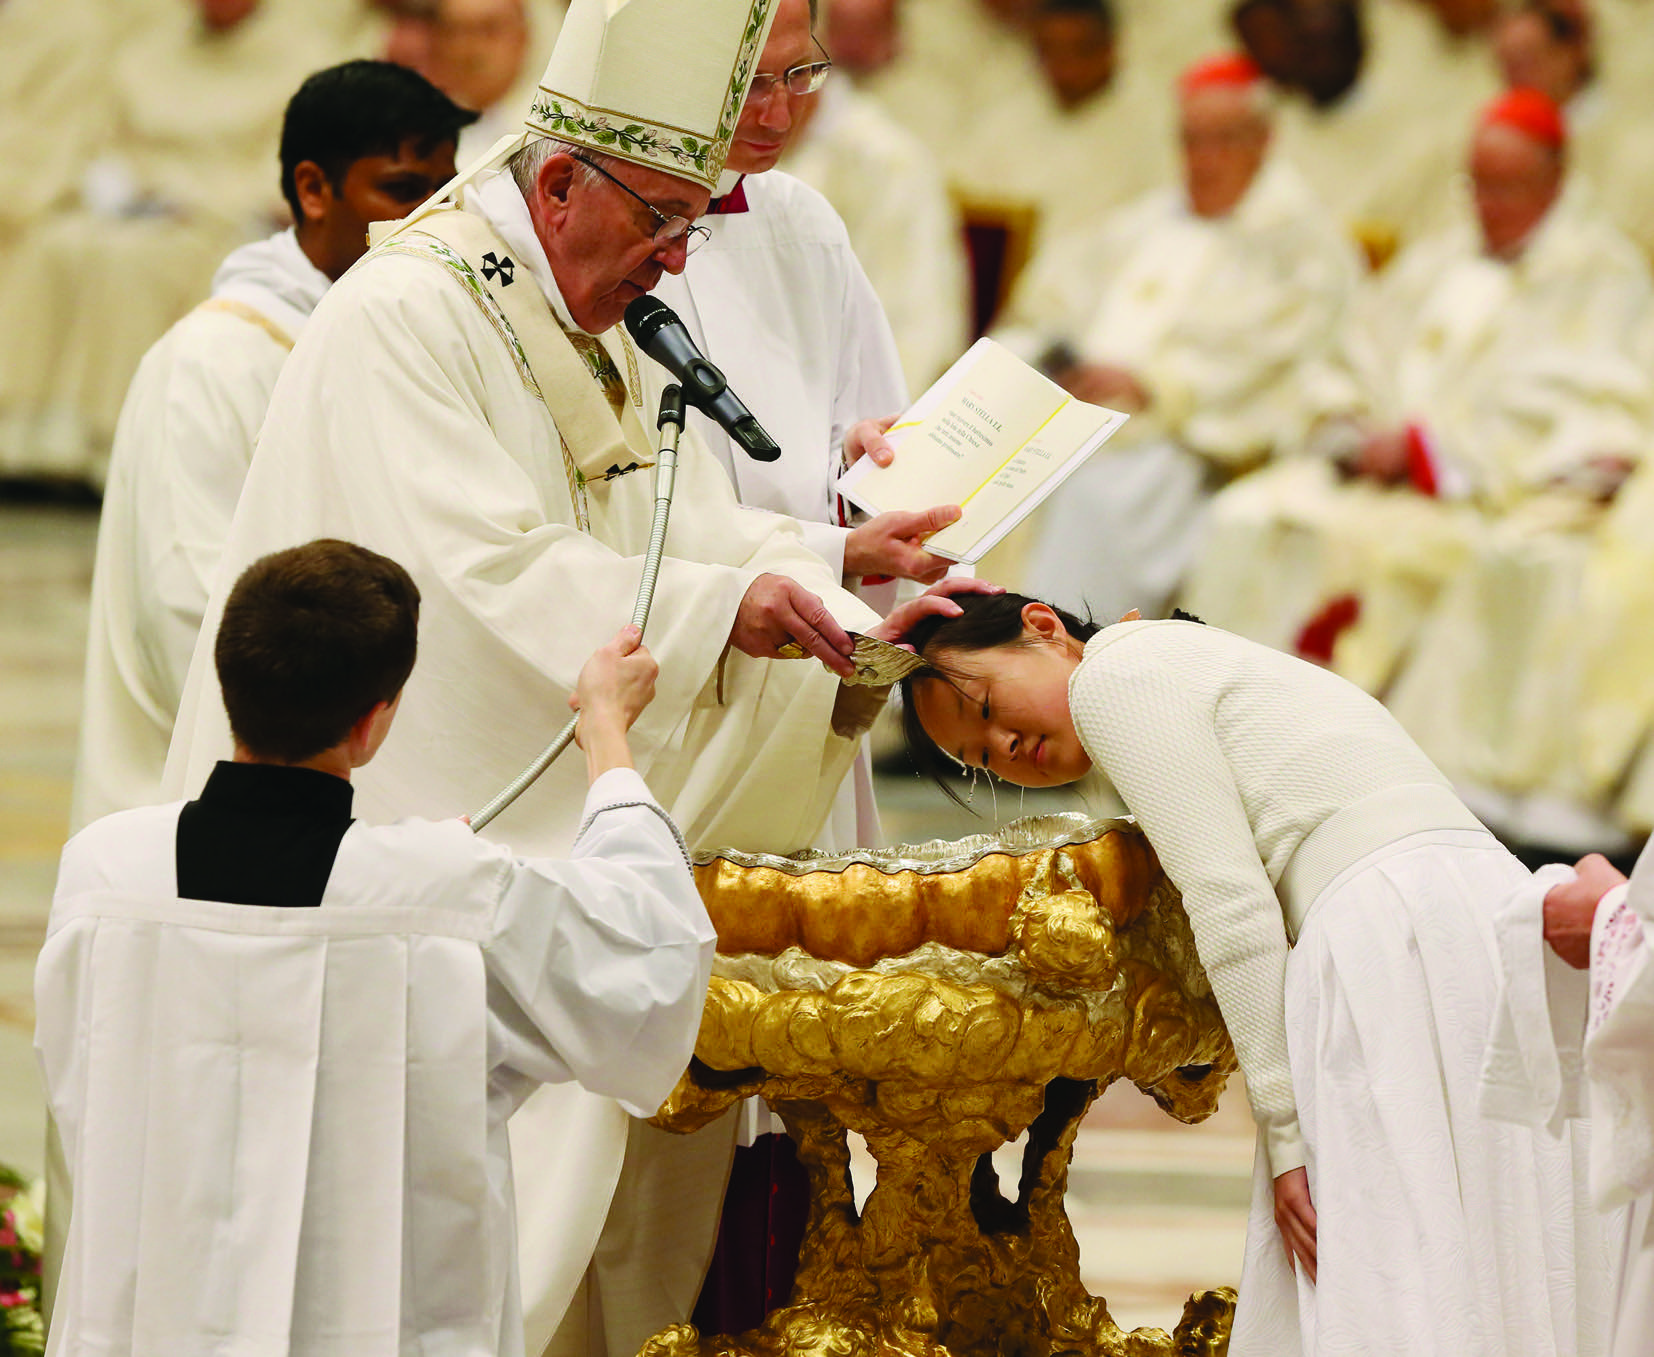 26/03/2016 Vatican Basilica. Holy Saturday. Easter Vigil in the Holy Night and Holy Mass celebrated by Pope Francis. The Holy Father imparts the sacrament of baptism to the neophytes. Mary Stella Li Zhang, Cina. Photo Grzegorz Galazka.